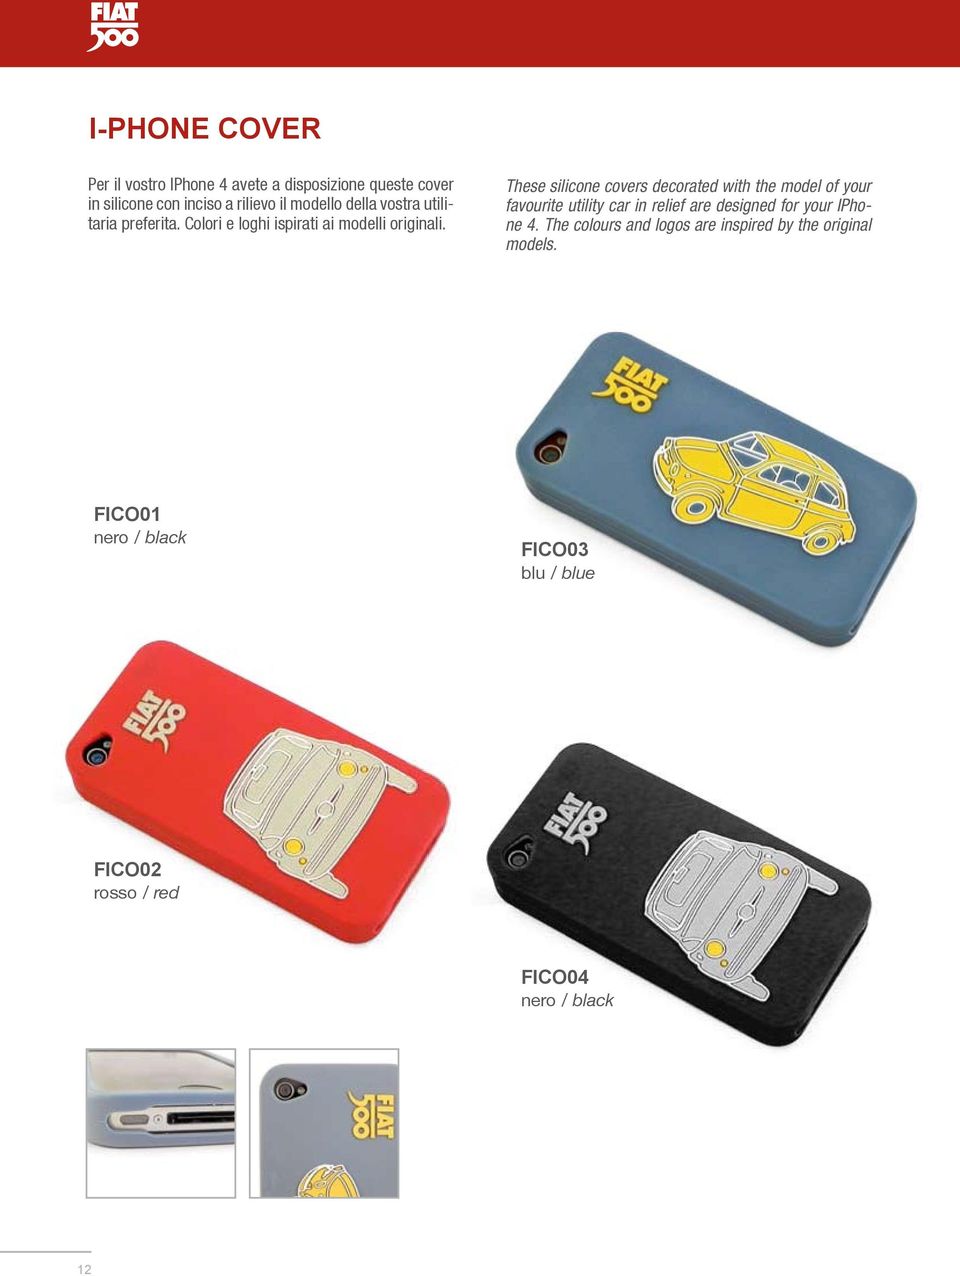 These silicone covers decorated with the model of your favourite utility car in relief are designed for your